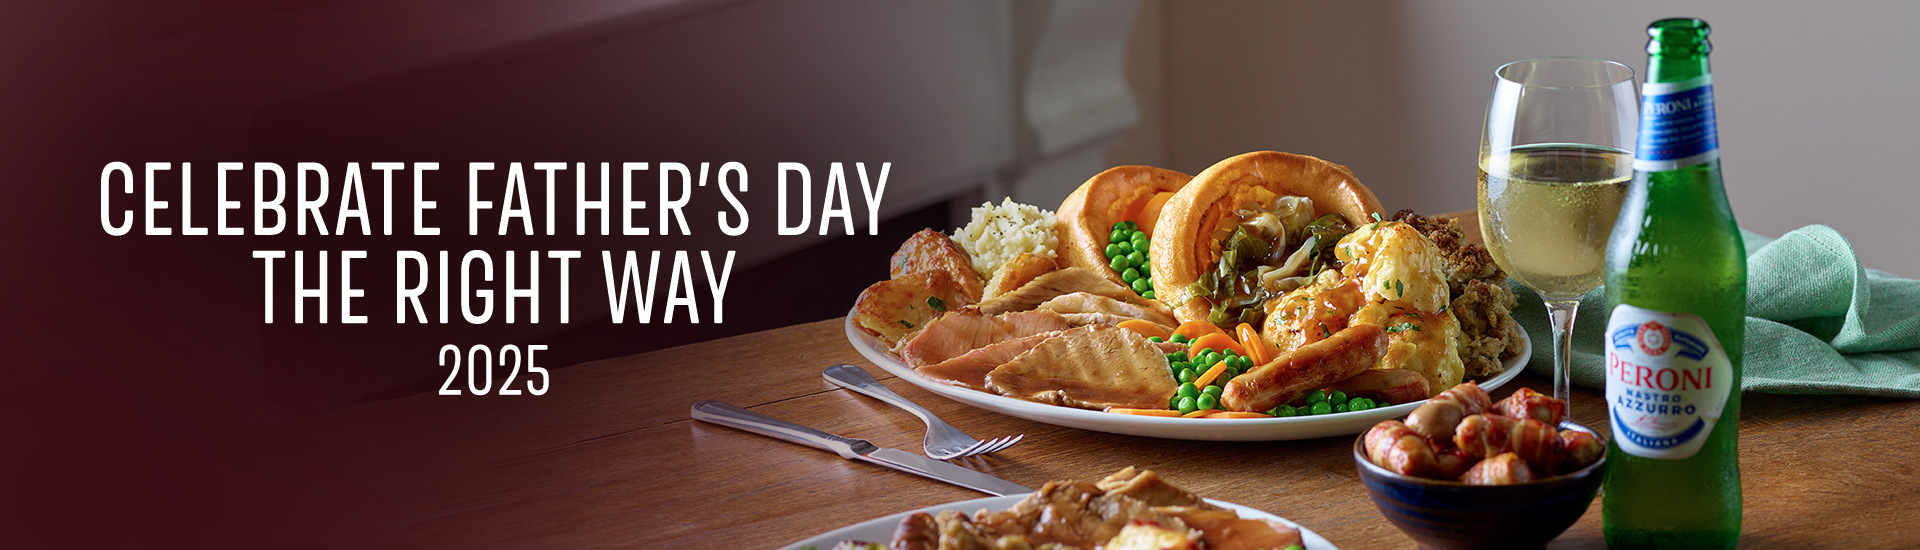 Father’s day carvery in Basildon